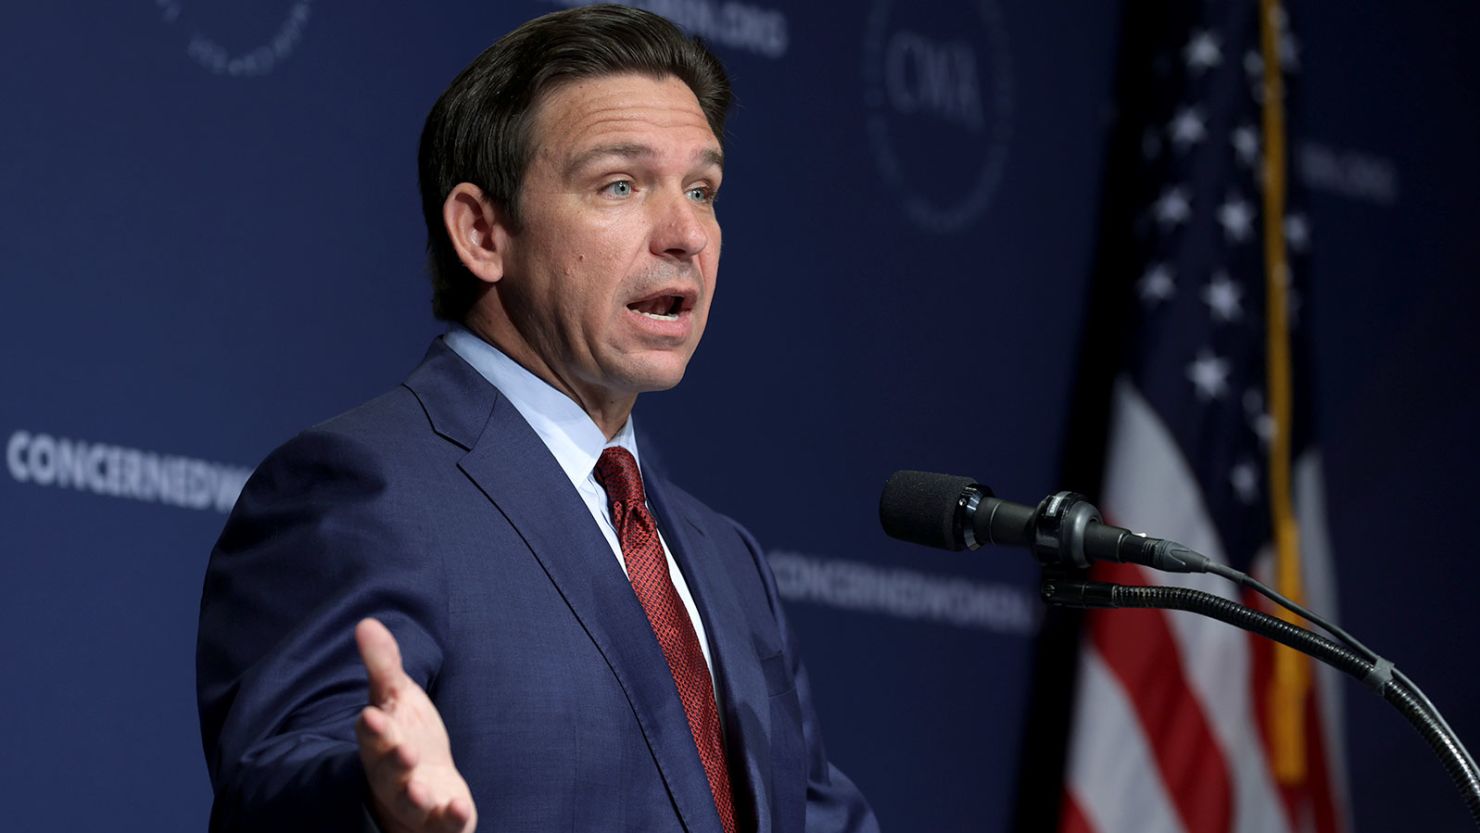 Republican U.S. presidential candidate and Florida Gov. Ron DeSantis addresses the Concerned Women for America Legislative Action Committee (CWALAC) on September 15, 2023 in Washington, DC.